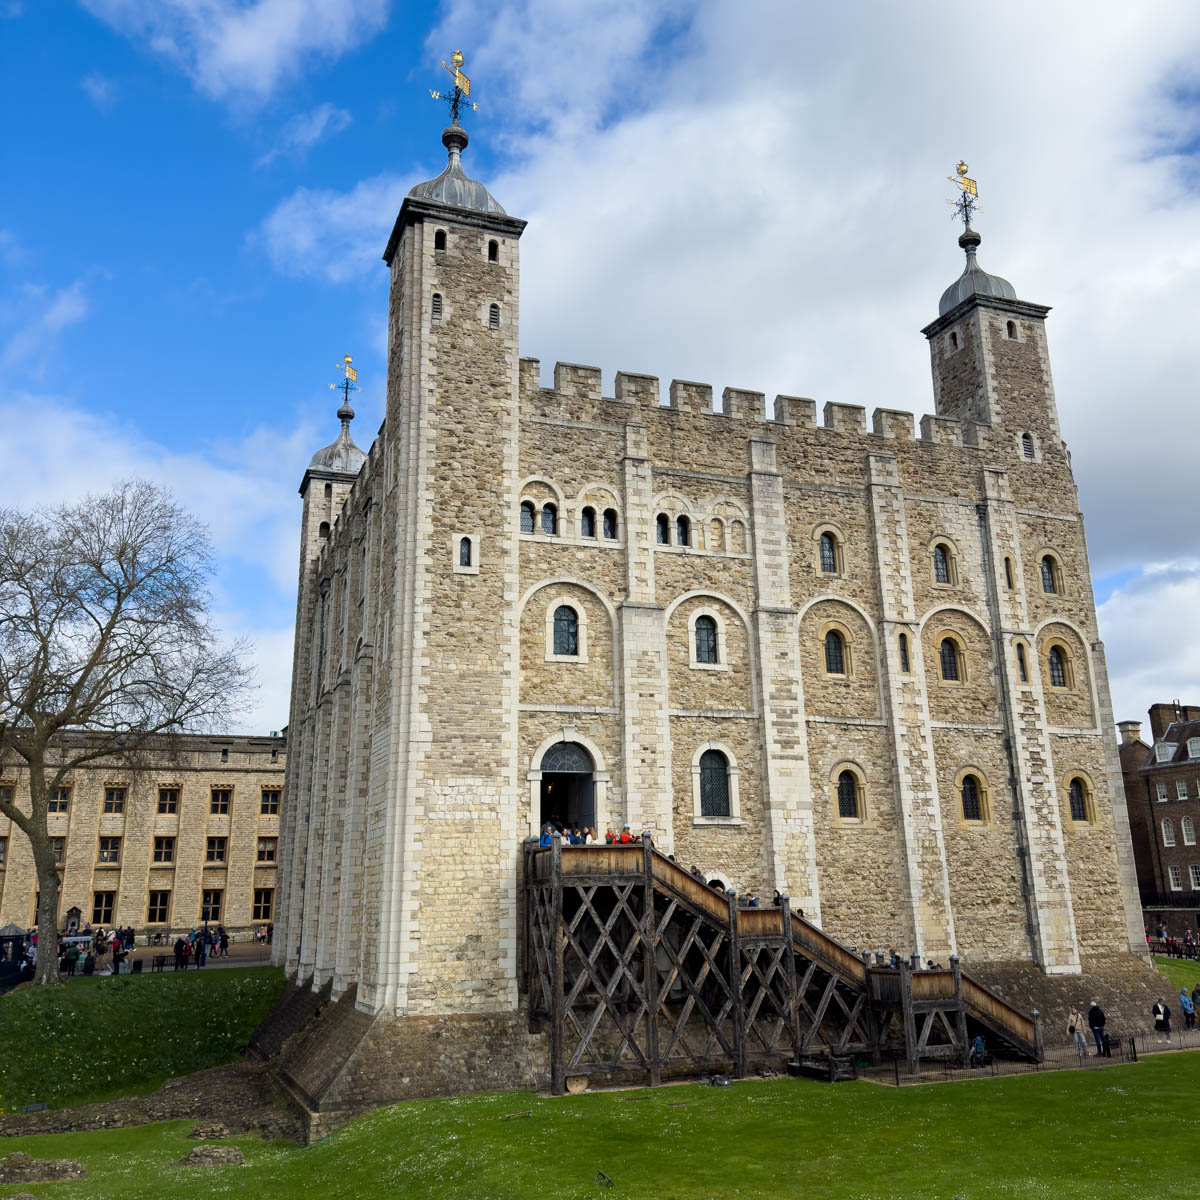 The White Tower within the Tower of London museum.